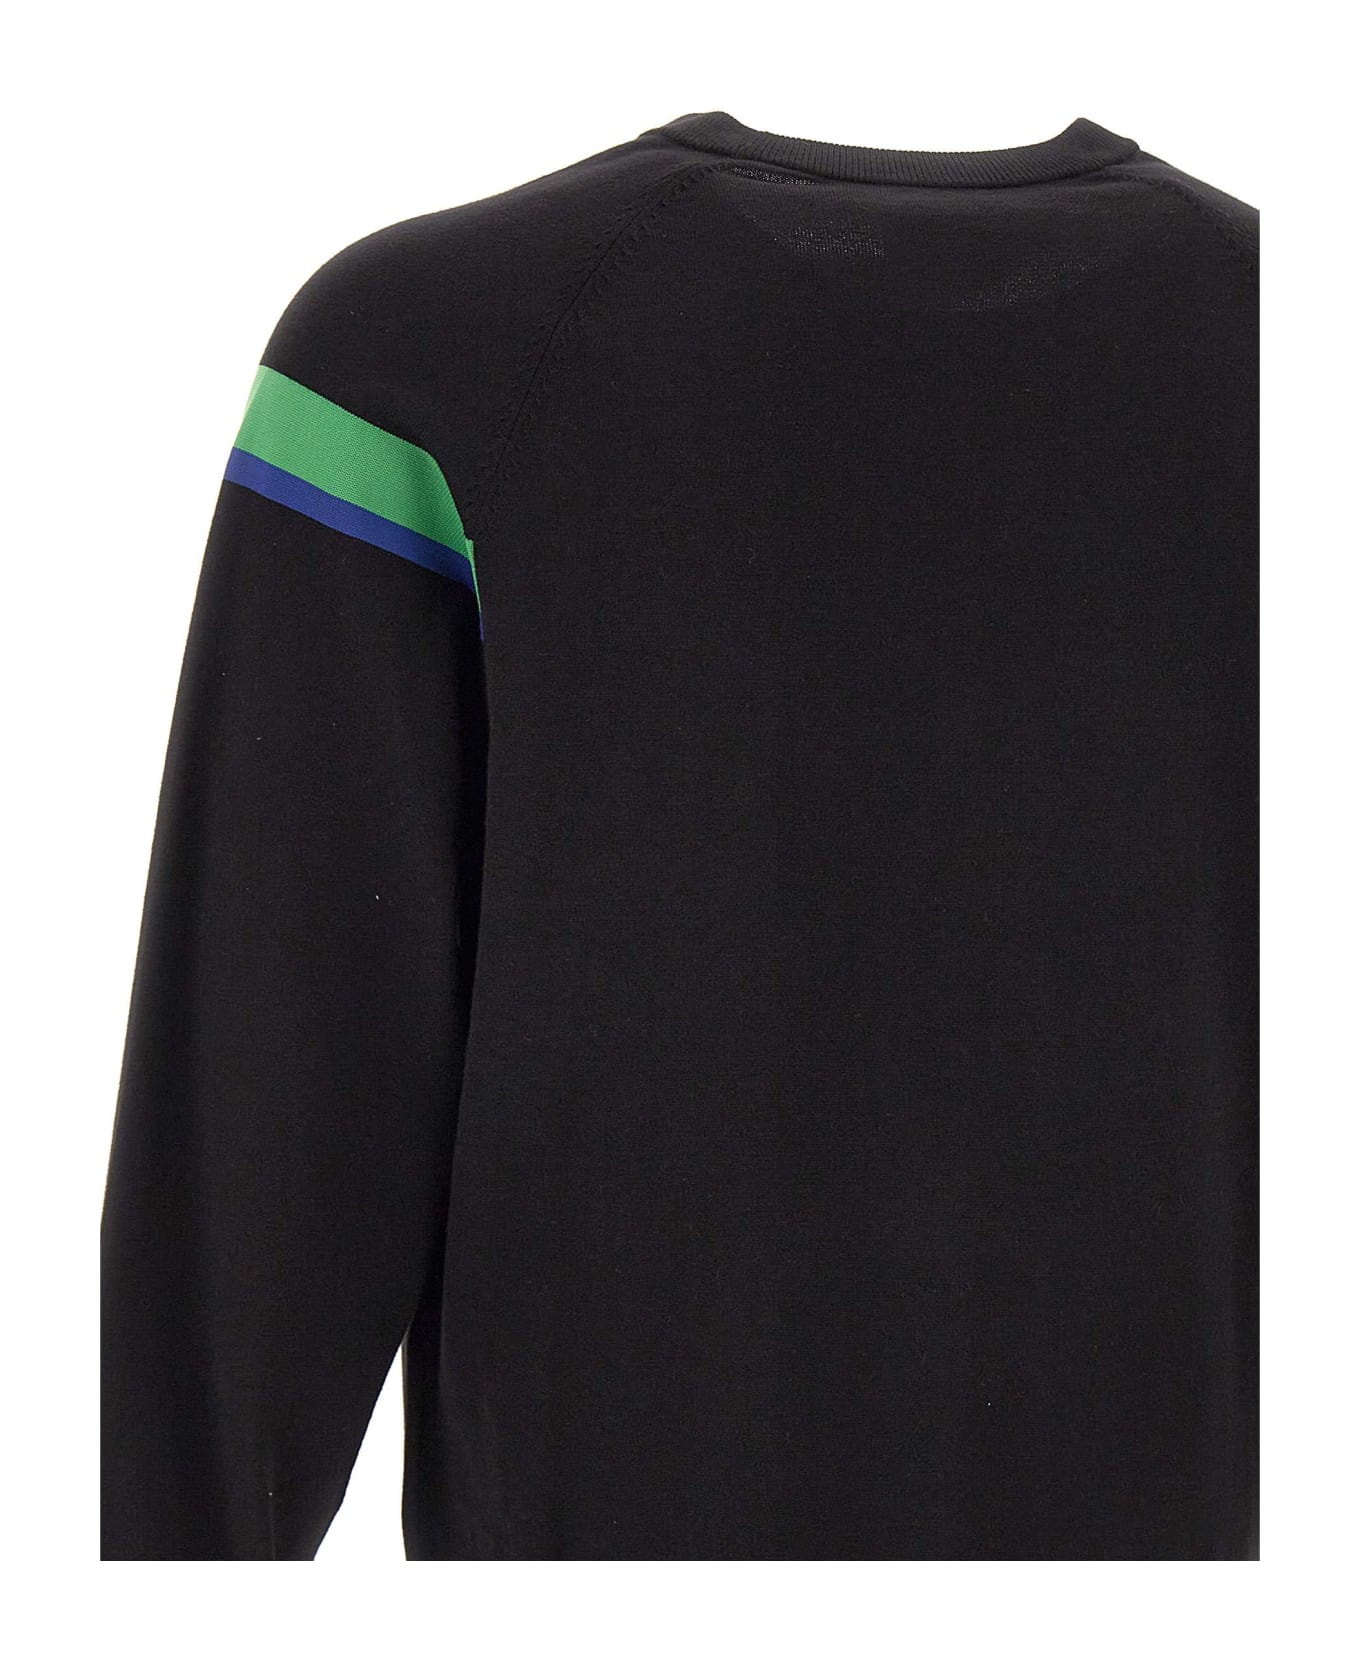 PS by Paul Smith Organic Cotton Sweater - BLACK ニットウェア